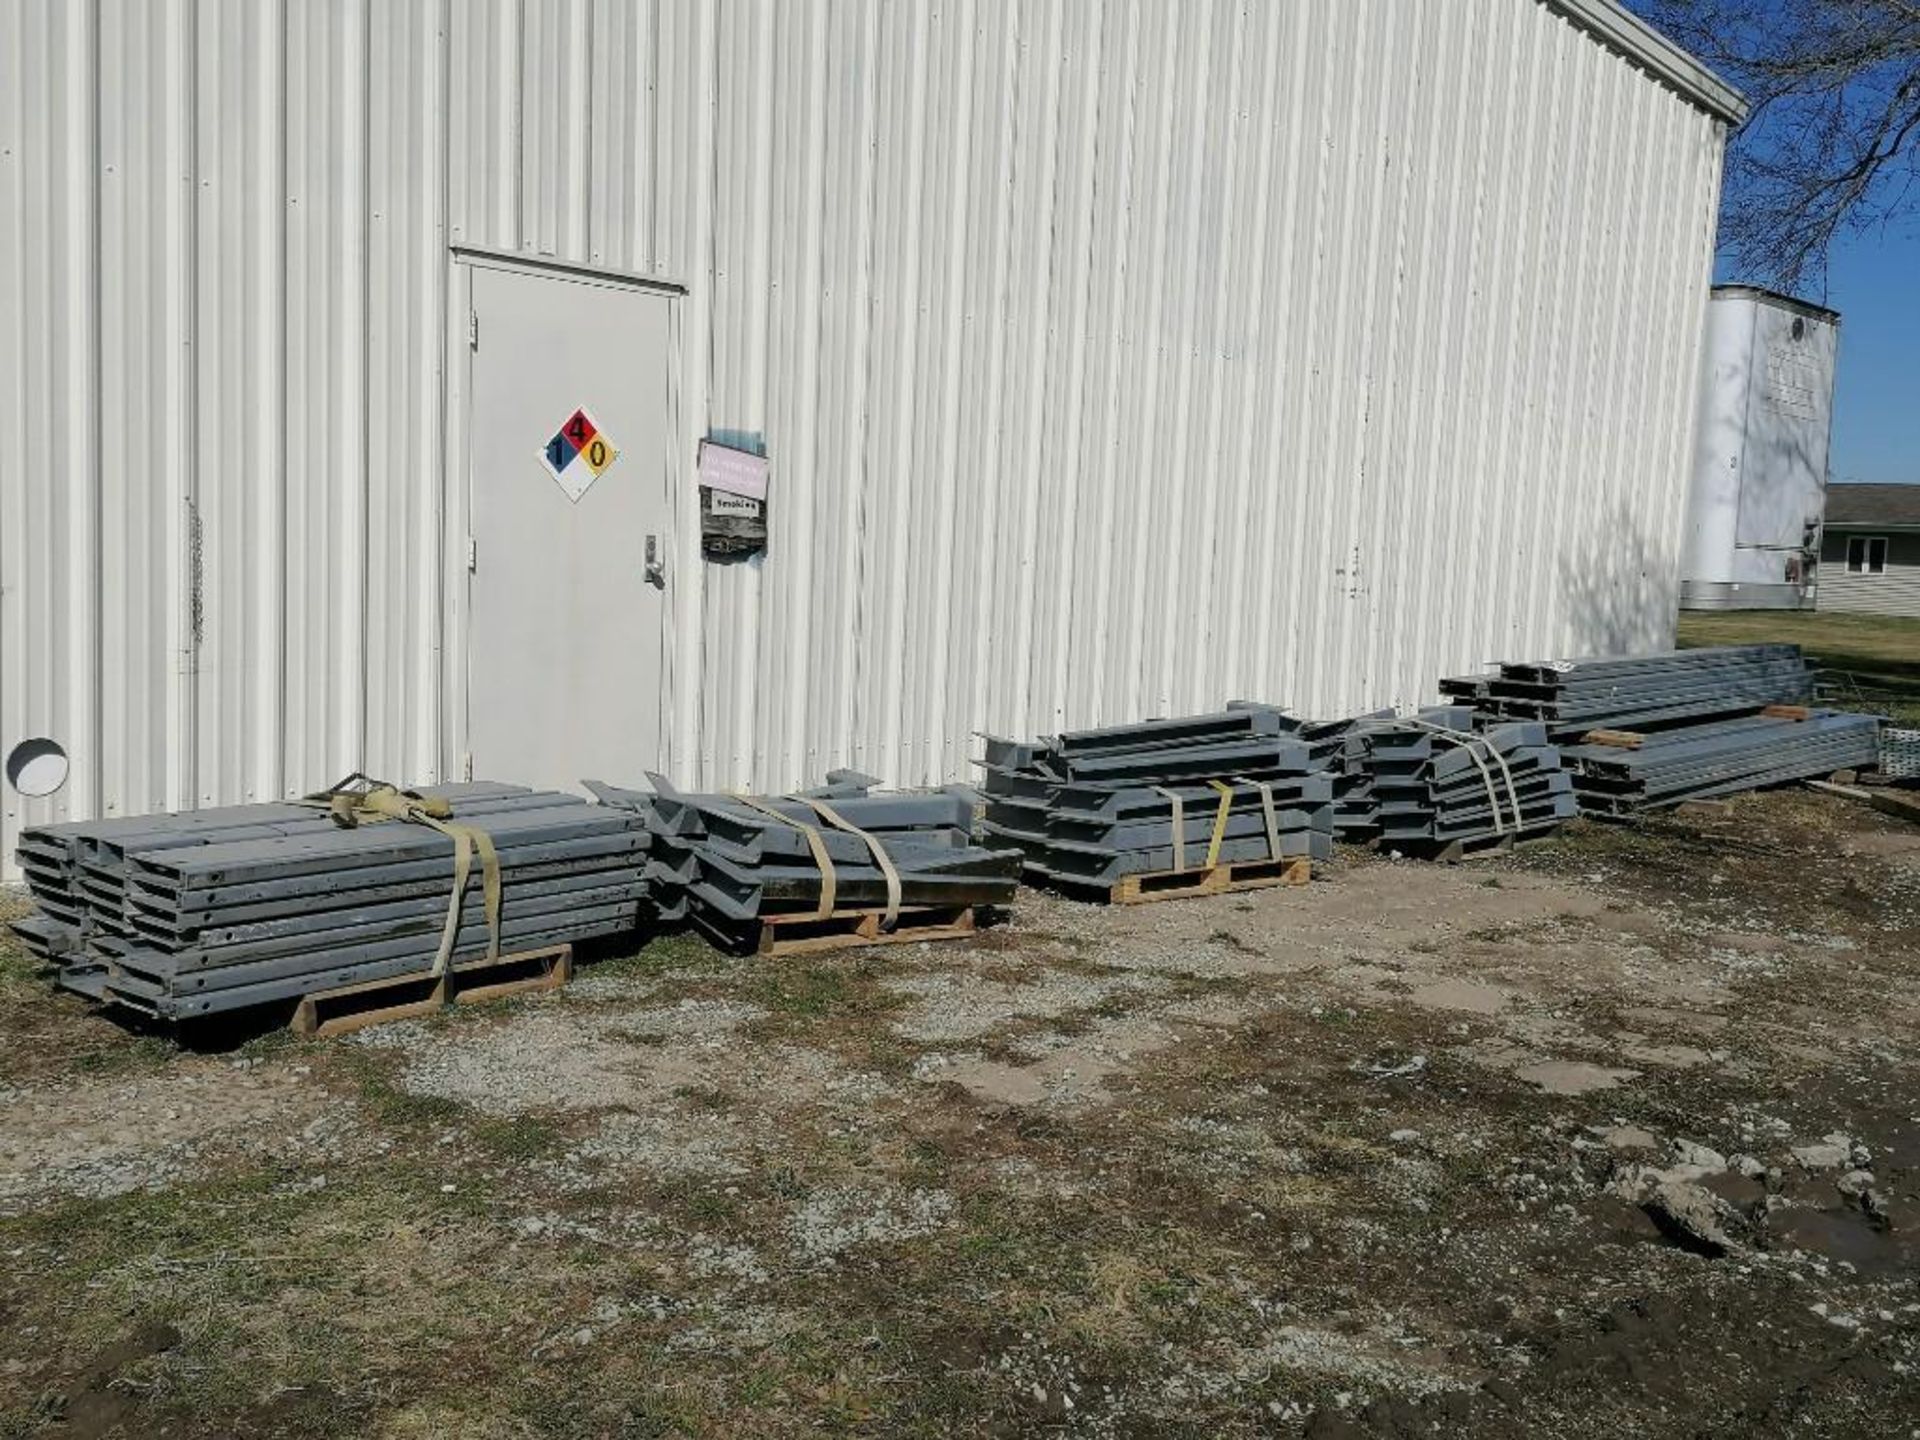 (20) 15' x 9 1/2" x 4" Upright Cantilever Rack, (40) 5' 1" Legs, (50) 4' Arms & (3) Buckets of